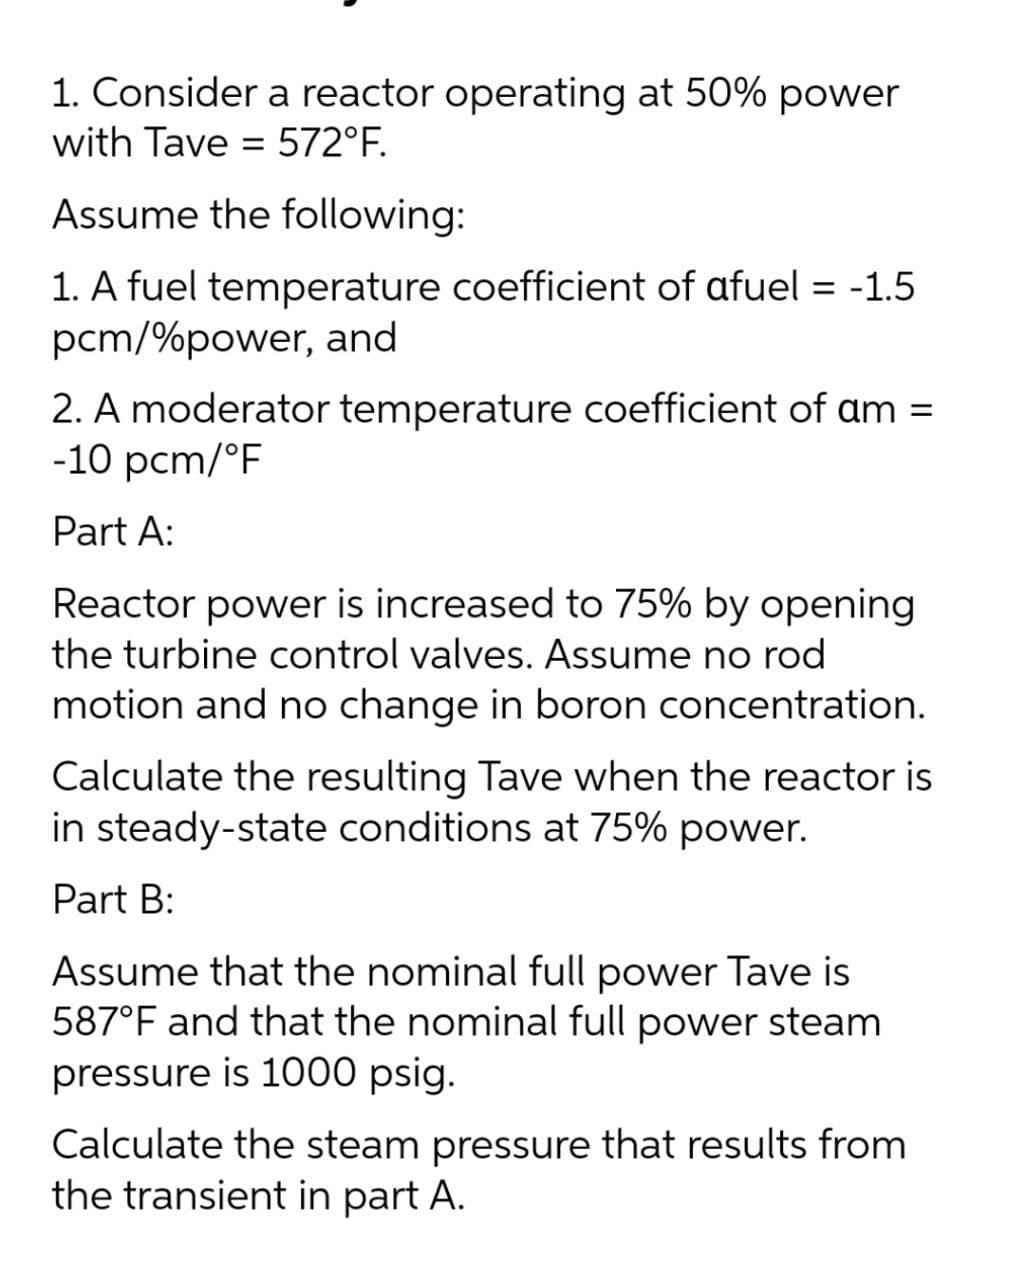 1. Consider a reactor operating at 50% power
with Tave = 572°F.
%3D
Assume the following:
1. A fuel temperature coefficient of afuel = -1.5
pcm/%power, and
2. A moderator temperature coefficient of am =
-10 pcm/°F
Part A:
Reactor power is increased to 75% by opening
the turbine control valves. Assume no rod
motion and no change in boron concentration.
Calculate the resulting Tave when the reactor is
in steady-state conditions at 75% power.
Part B:
Assume that the nominal full power Tave is
587°F and that the nominal full power steam
pressure is 1000 psig.
Calculate the steam pressure that results from
the transient in part A.
